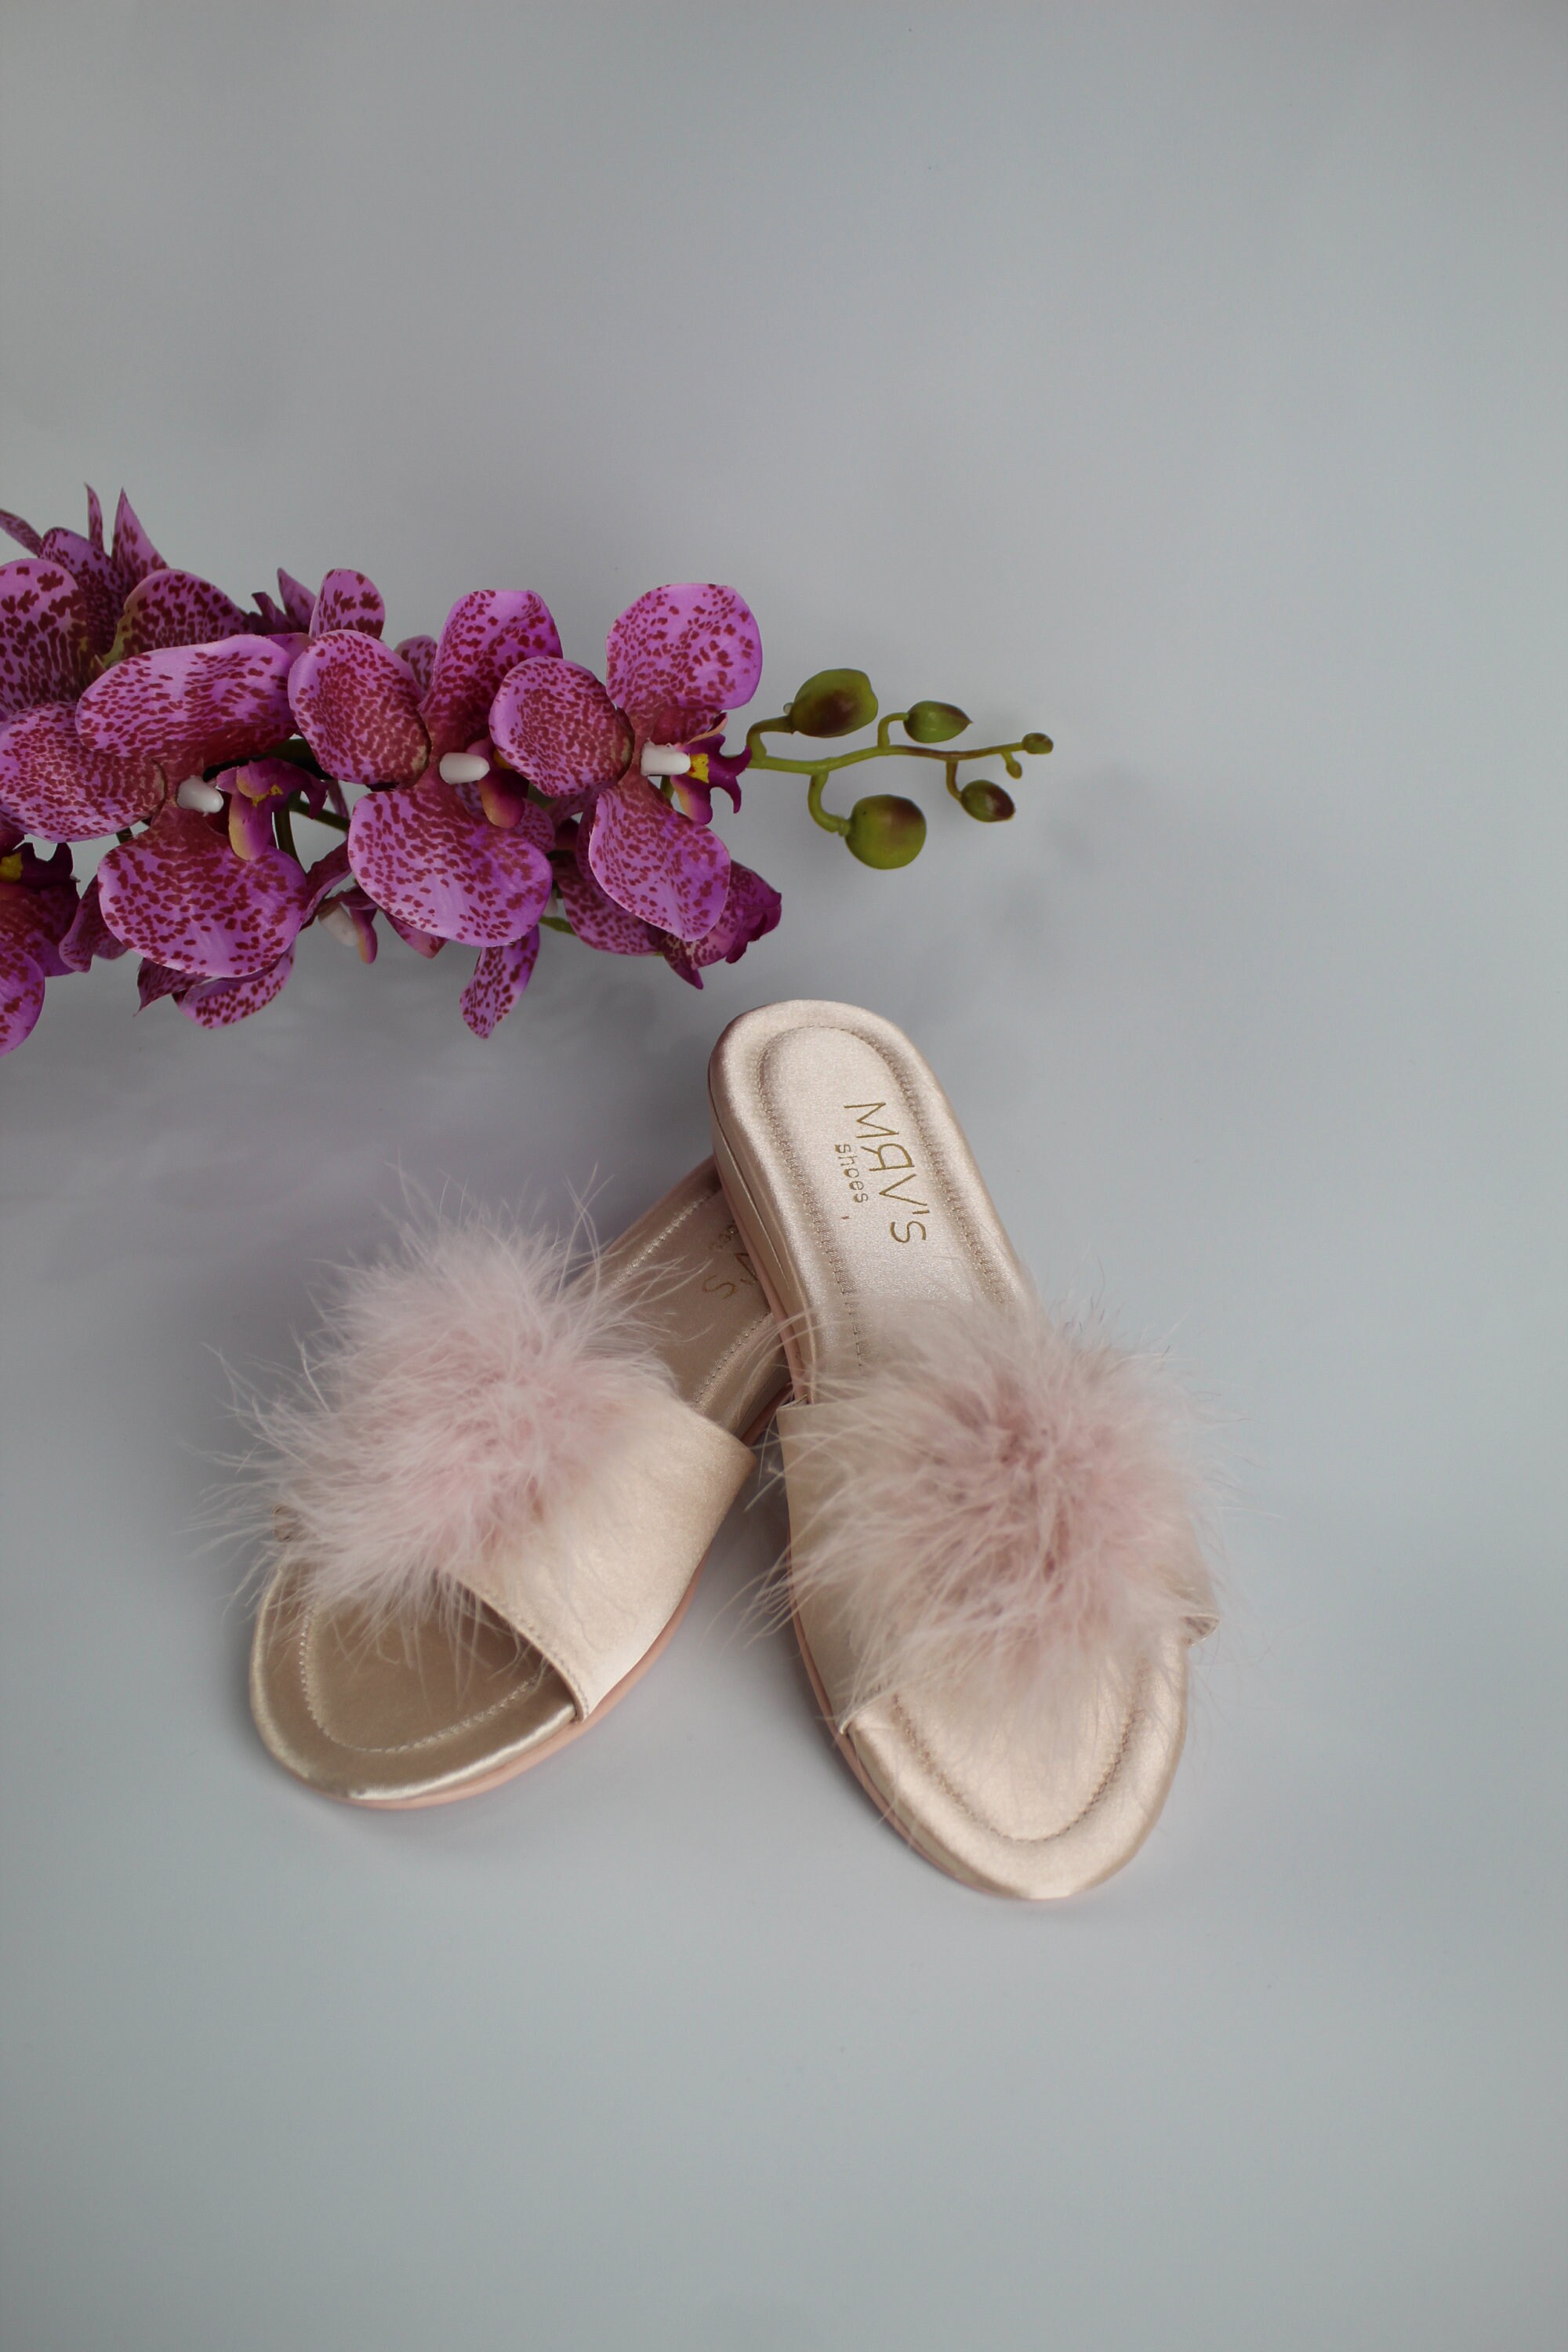 Personalized White Feather Satin Slippers for Bride Women. - Etsy